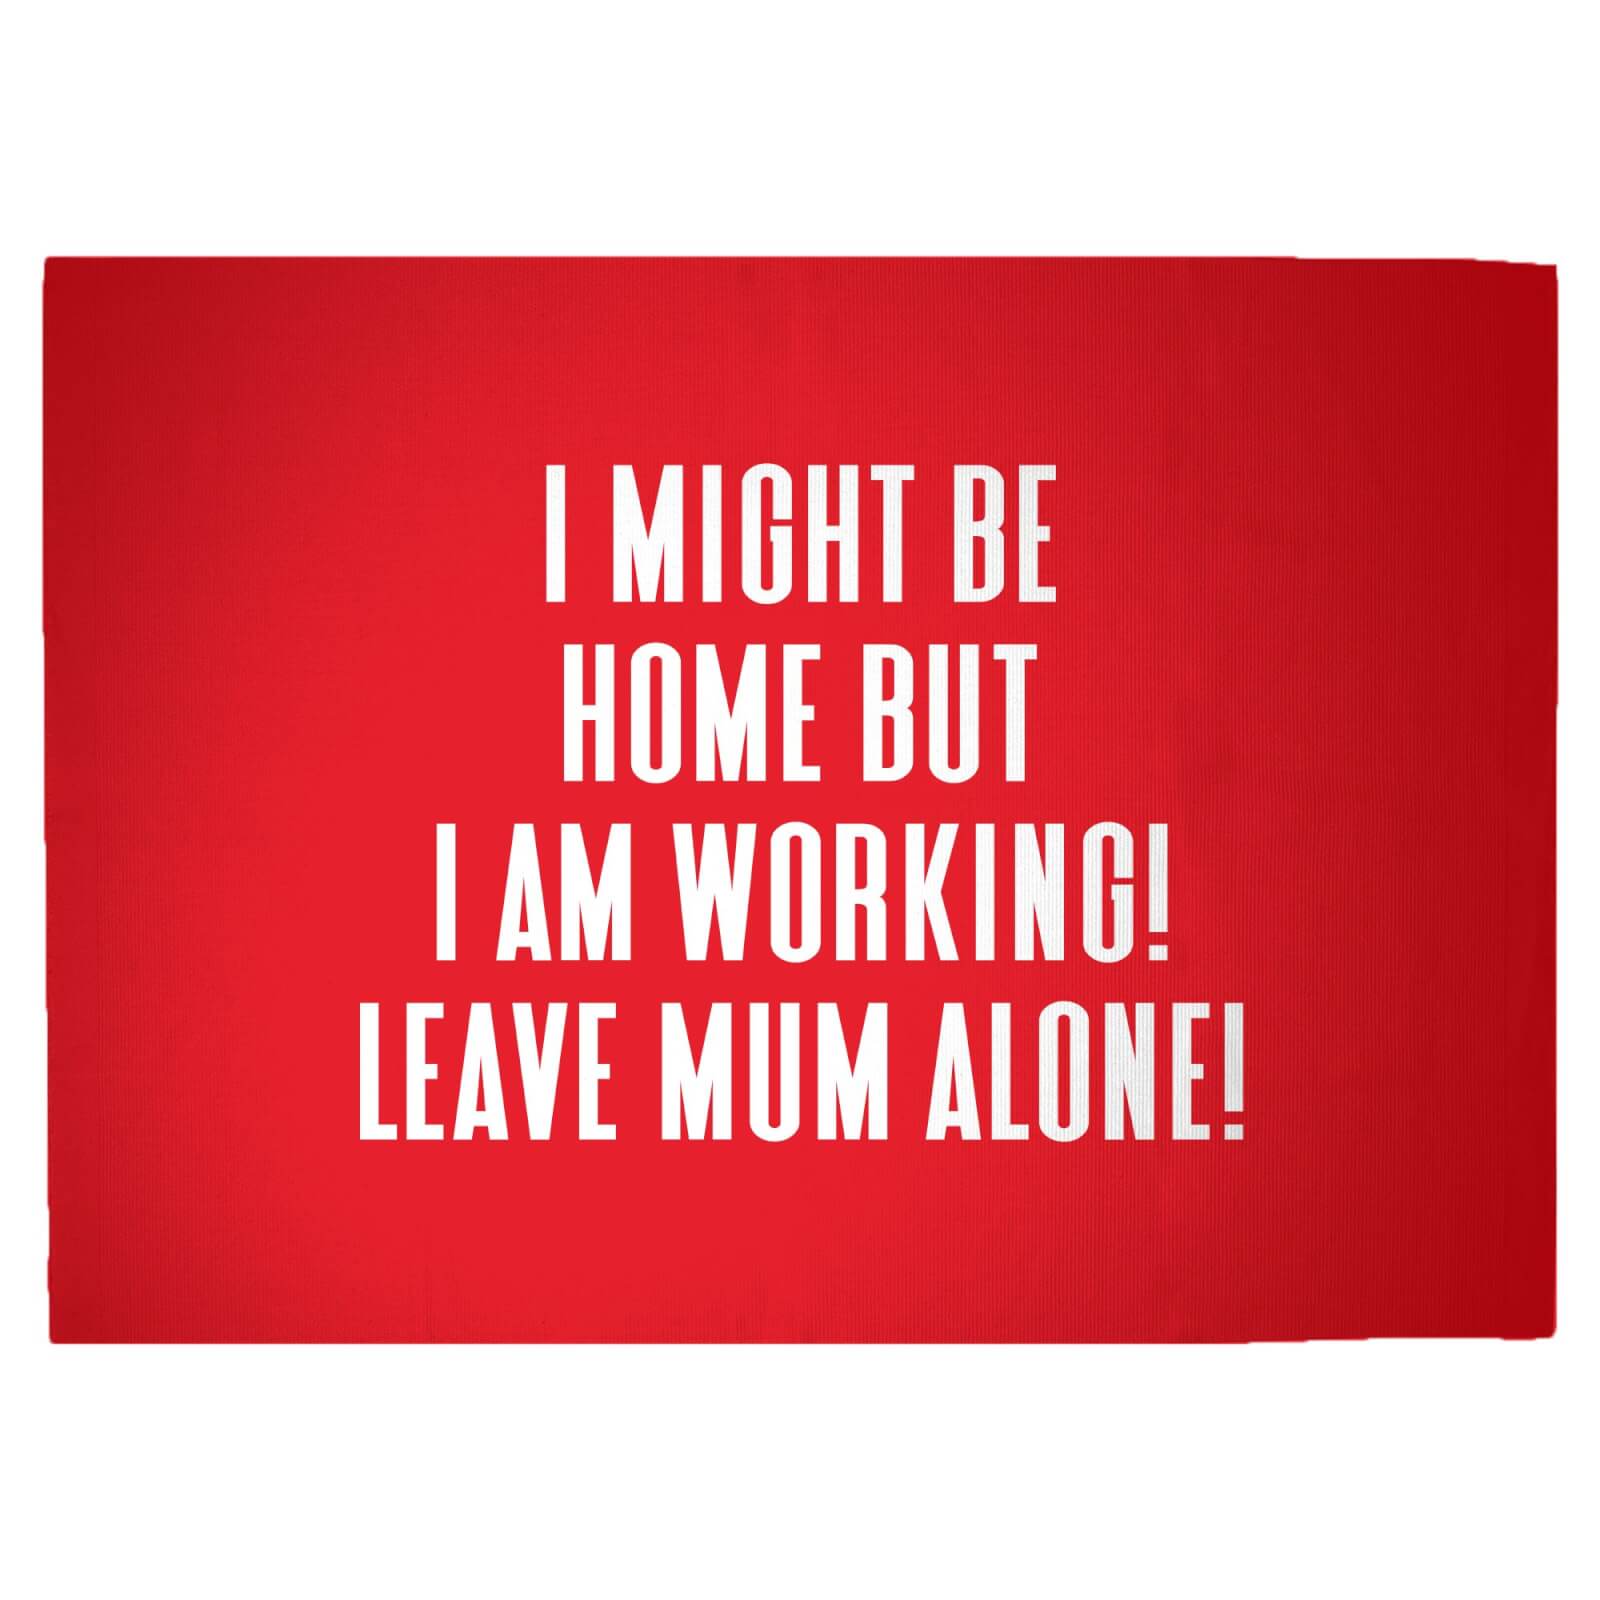 I Might Be Home But I Am Working Leave Mum Alone! Woven Rug - Large